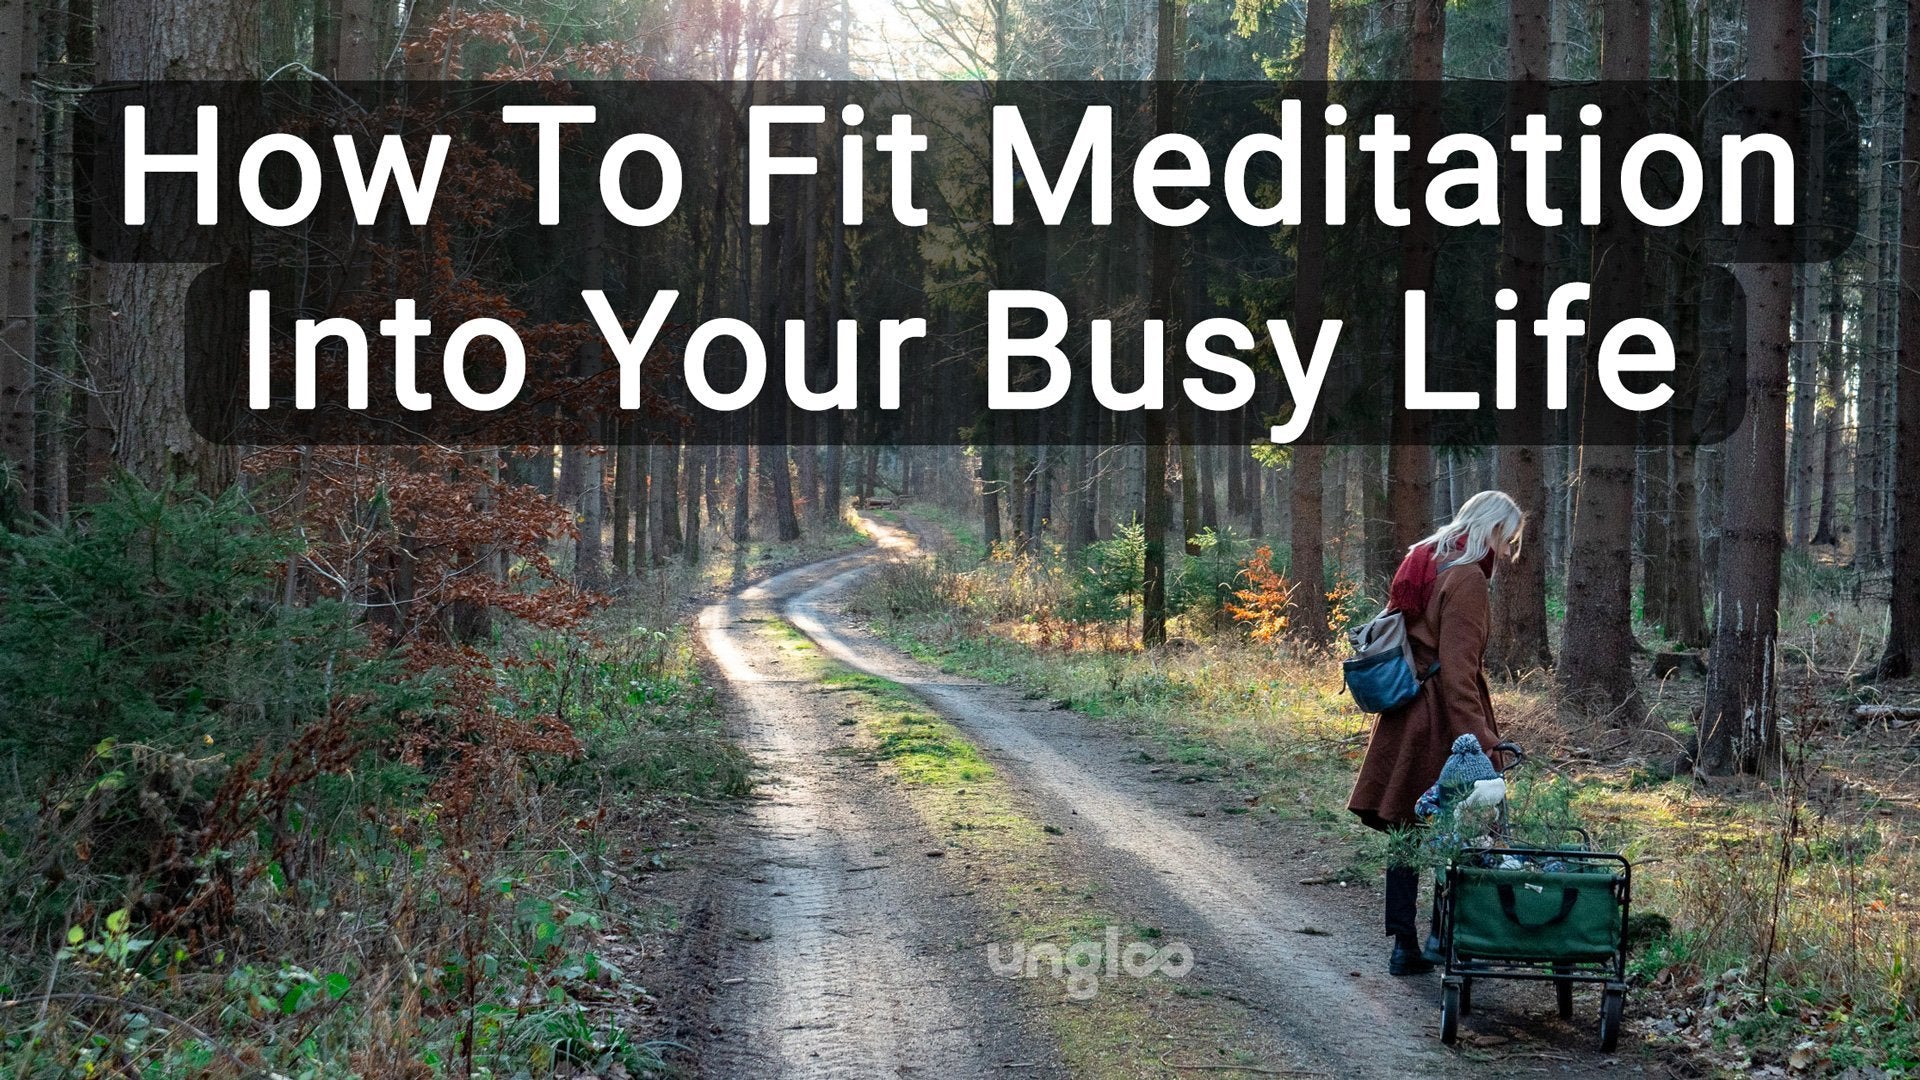 How To Fit Meditation Into Your Busy Life